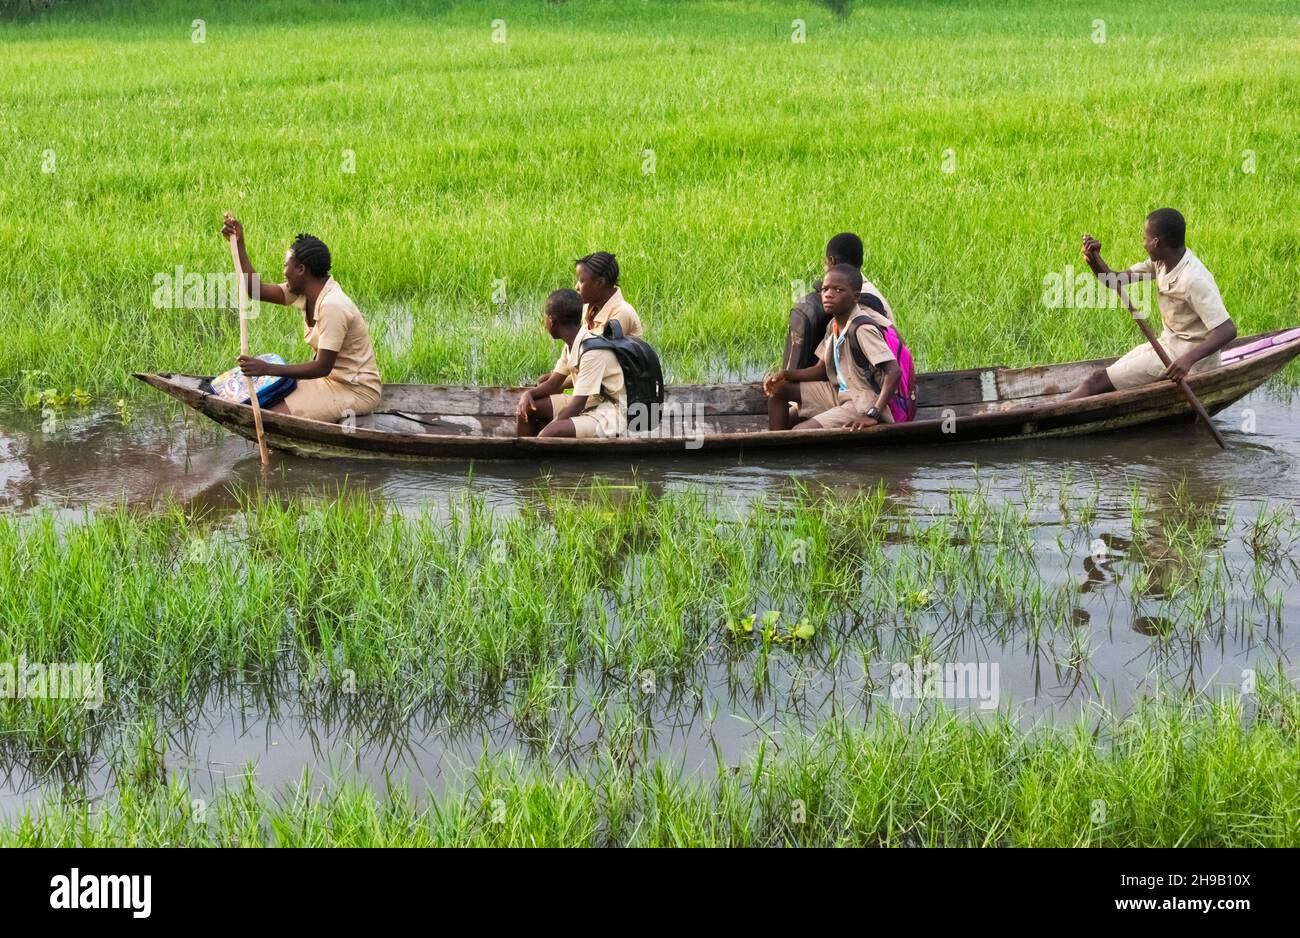 Students traveling on boat to go to school in the lake village of Ganvie on Lake Nokoue, Benin Stock Photo